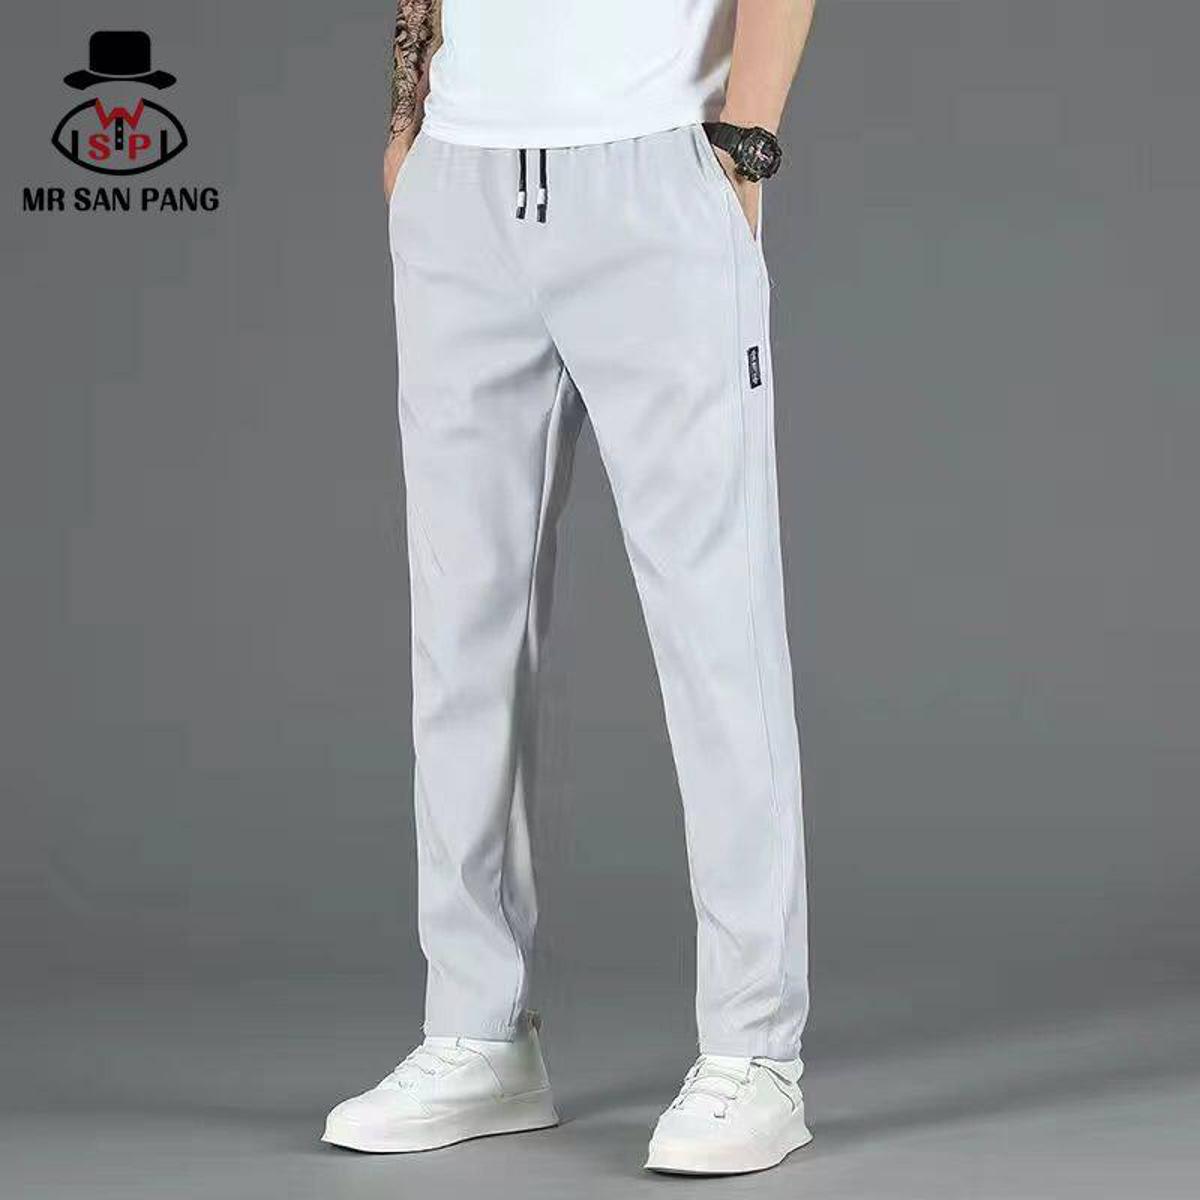 Ice Silk Pants Men Thin Business Casual Pants Elastic Breathable Straight  Sports Trousers